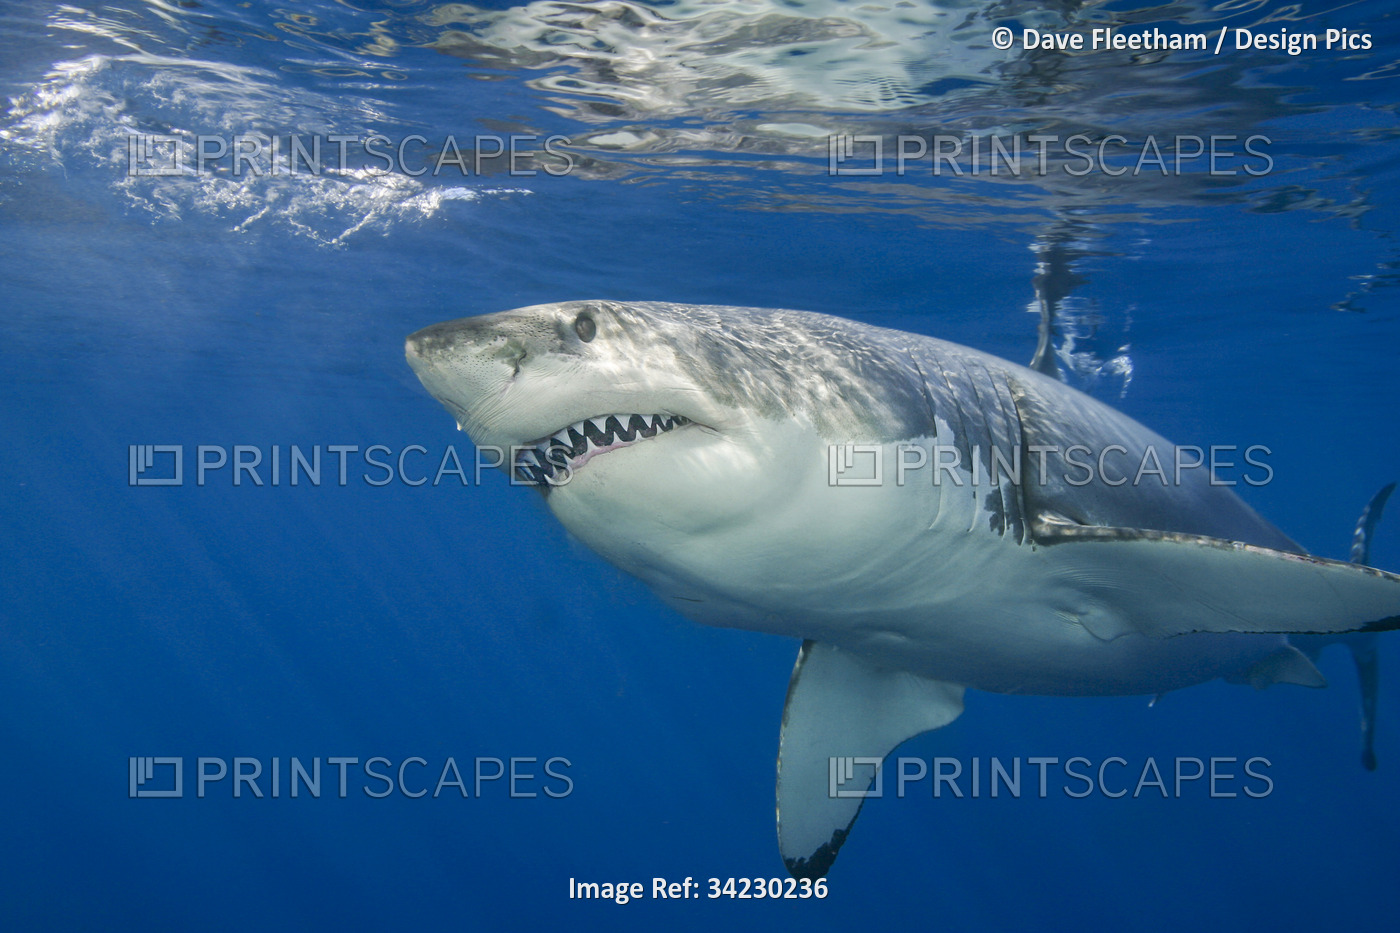 This Great white shark (Carcharodon carcharias) was photographed off Guadalupe ...